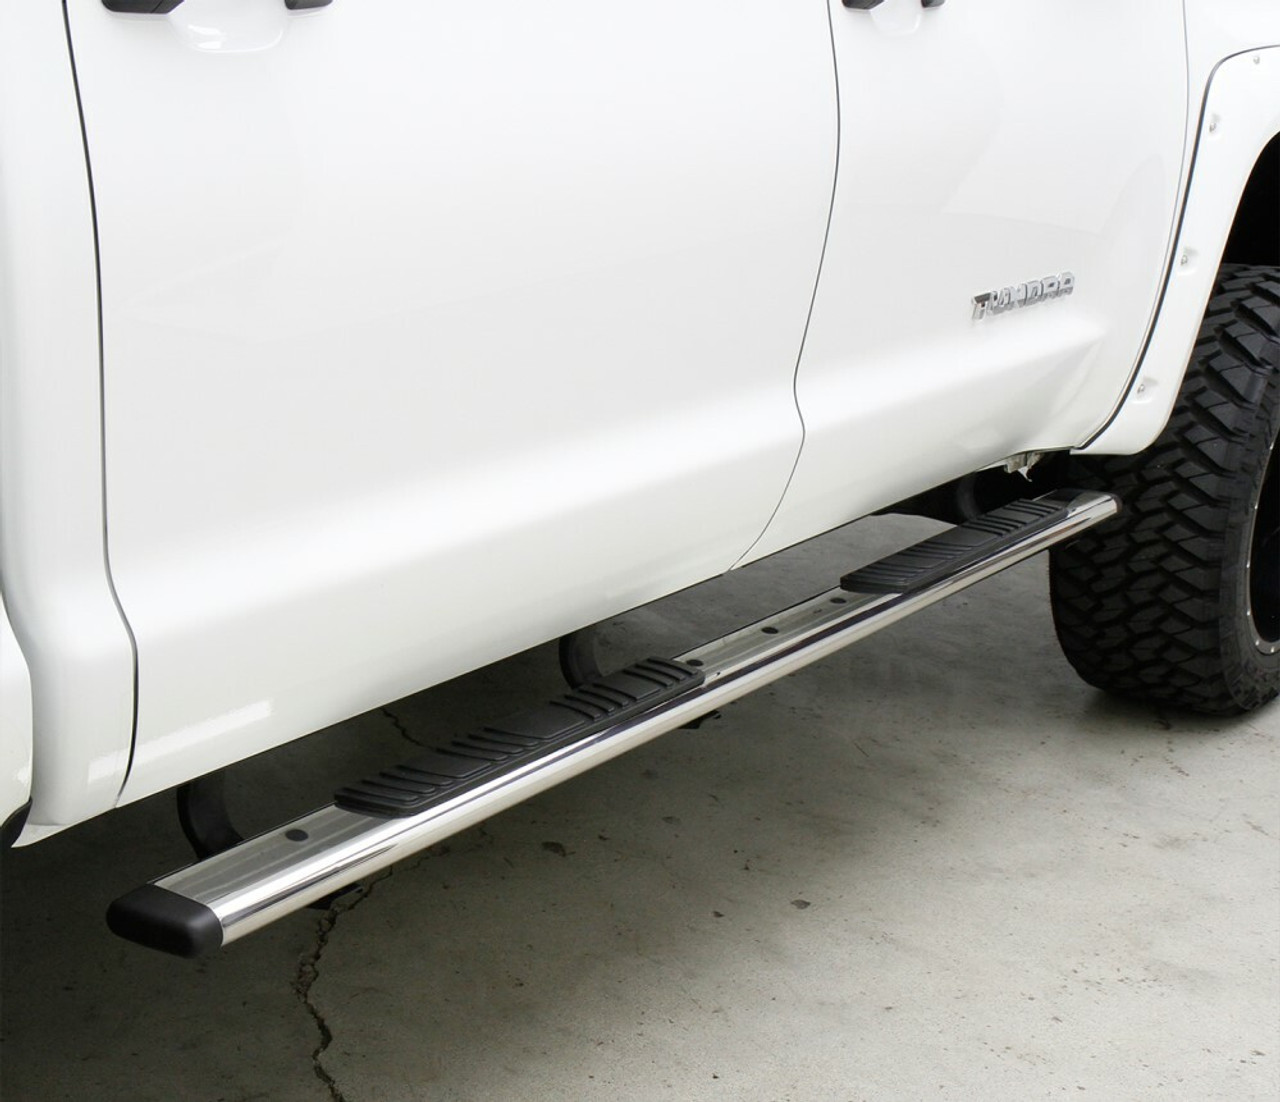 Go Rhino 685411075PS Dodge, Journey, 2009 - 2019, 5 inch OE Xtreme Low Profile - Complete Kit: Sidesteps + Brackets, Stainless steel, Polished, 650075PS side bars + 6841105 OE Xtreme Brackets. 5 inch wide x 75 inch long side bars